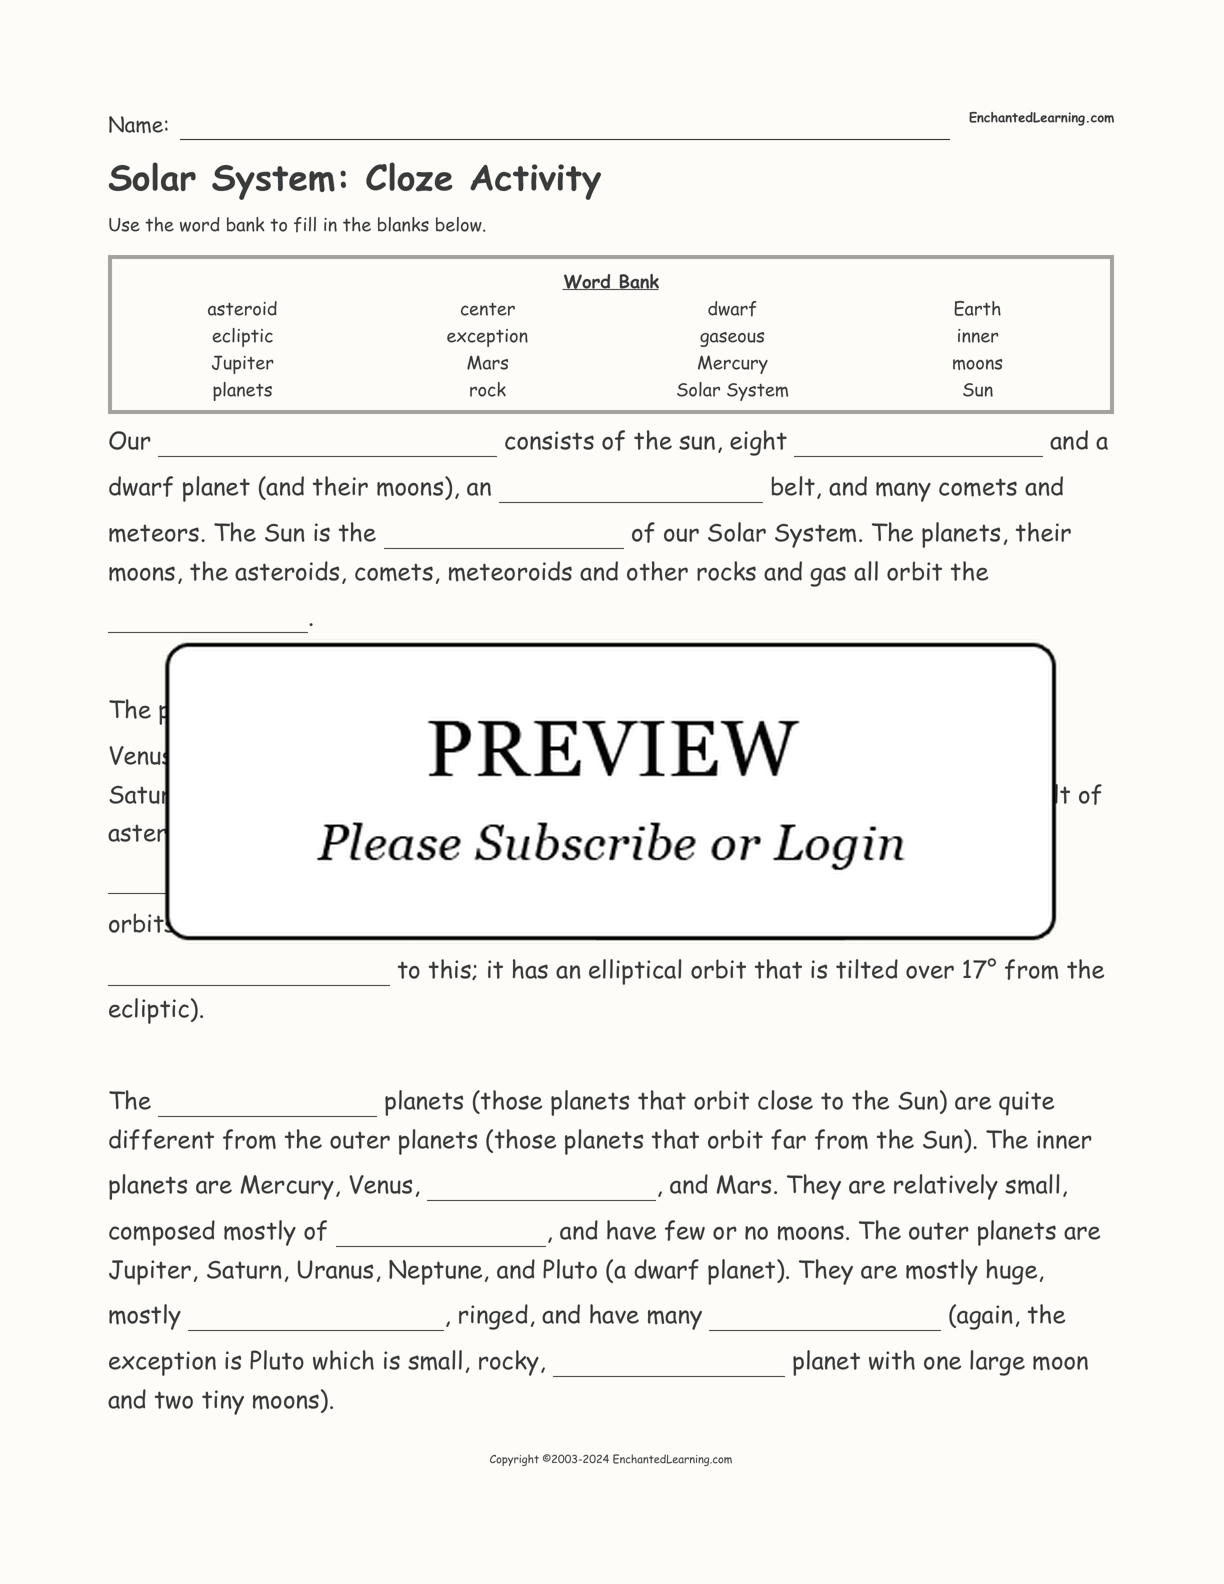 Solar System: Cloze Activity interactive worksheet page 1